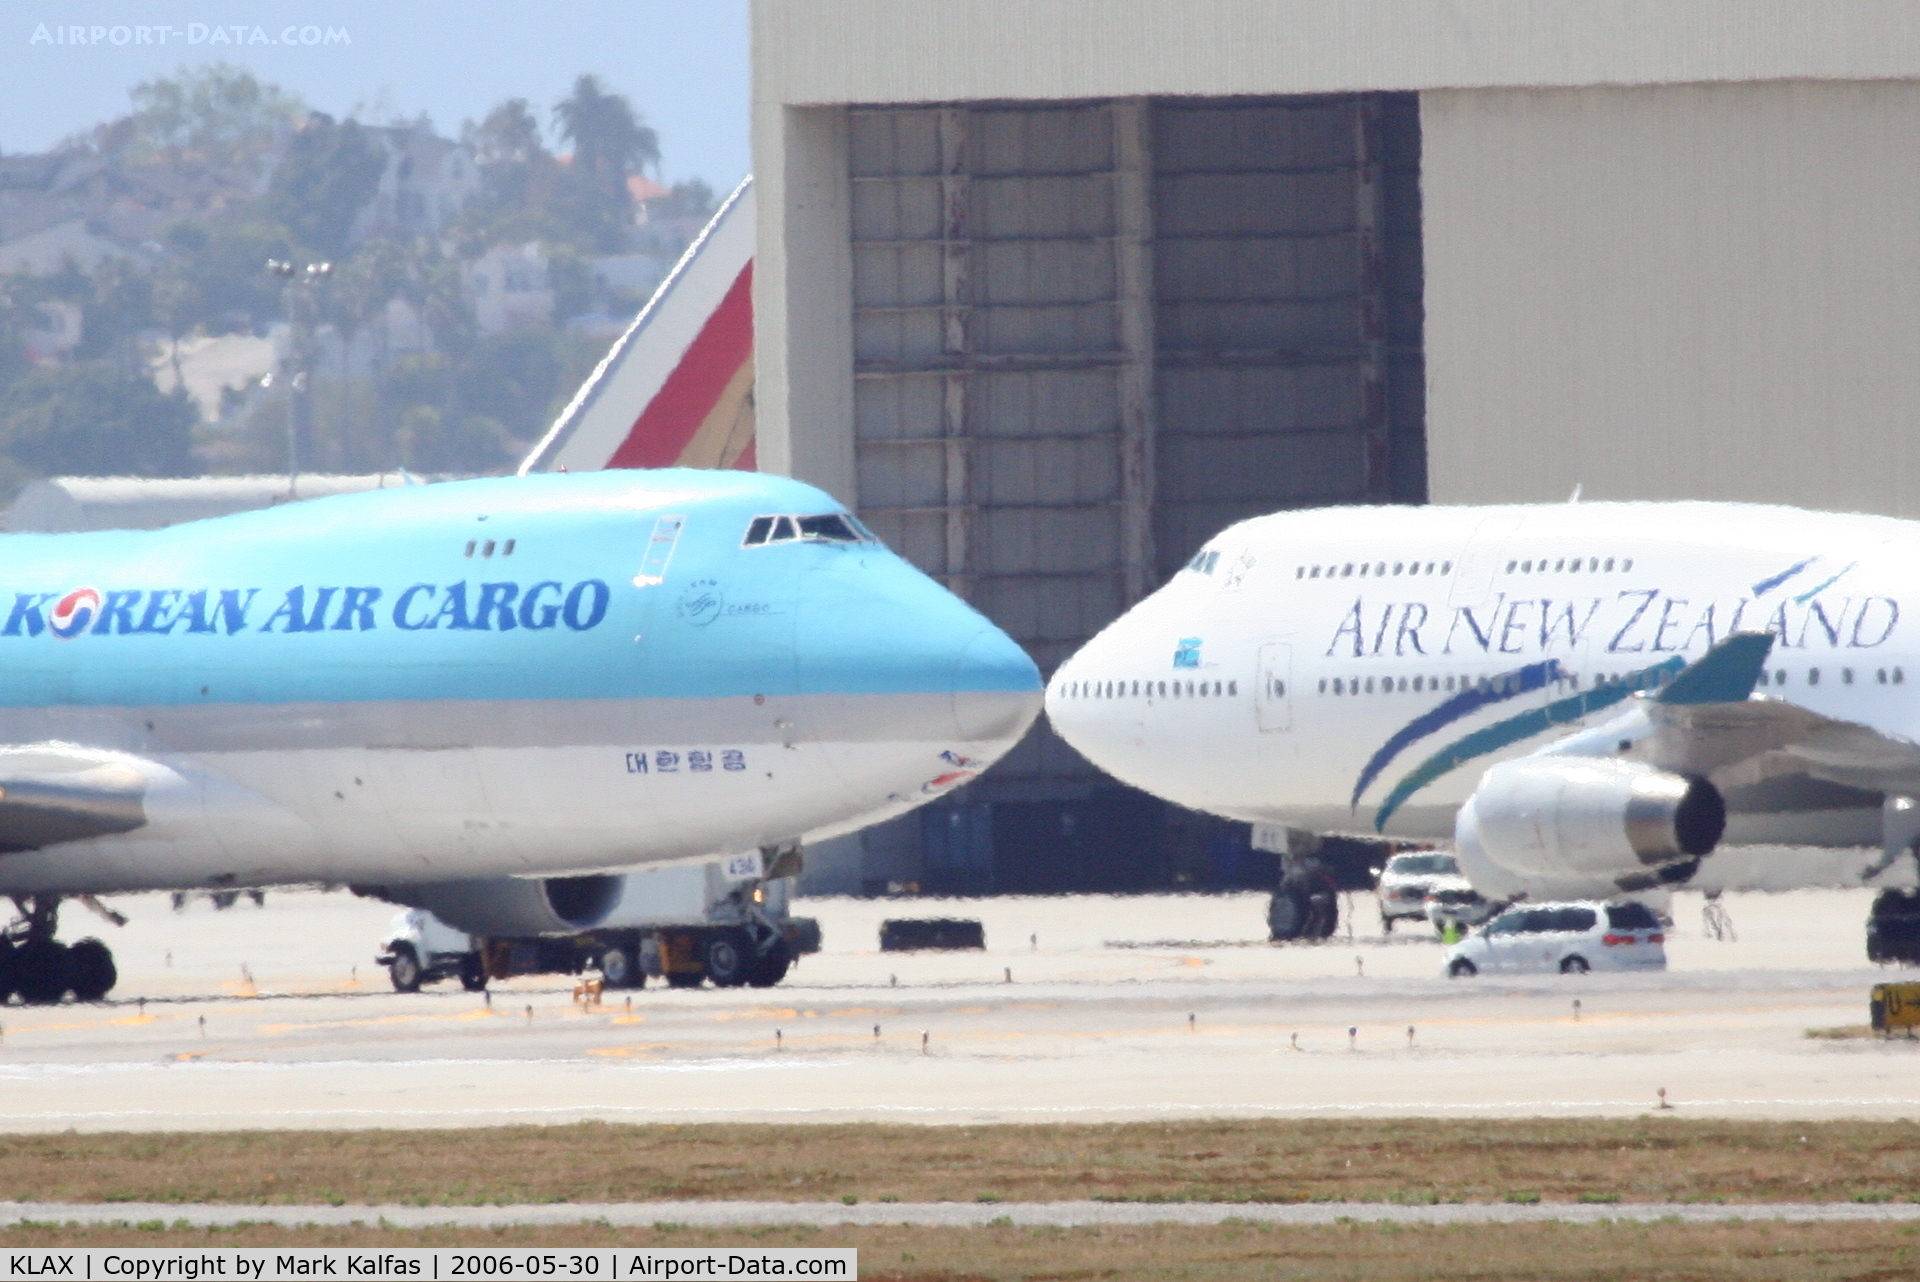 Los Angeles International Airport (LAX) - A Korean and Kiwi nose to nose...